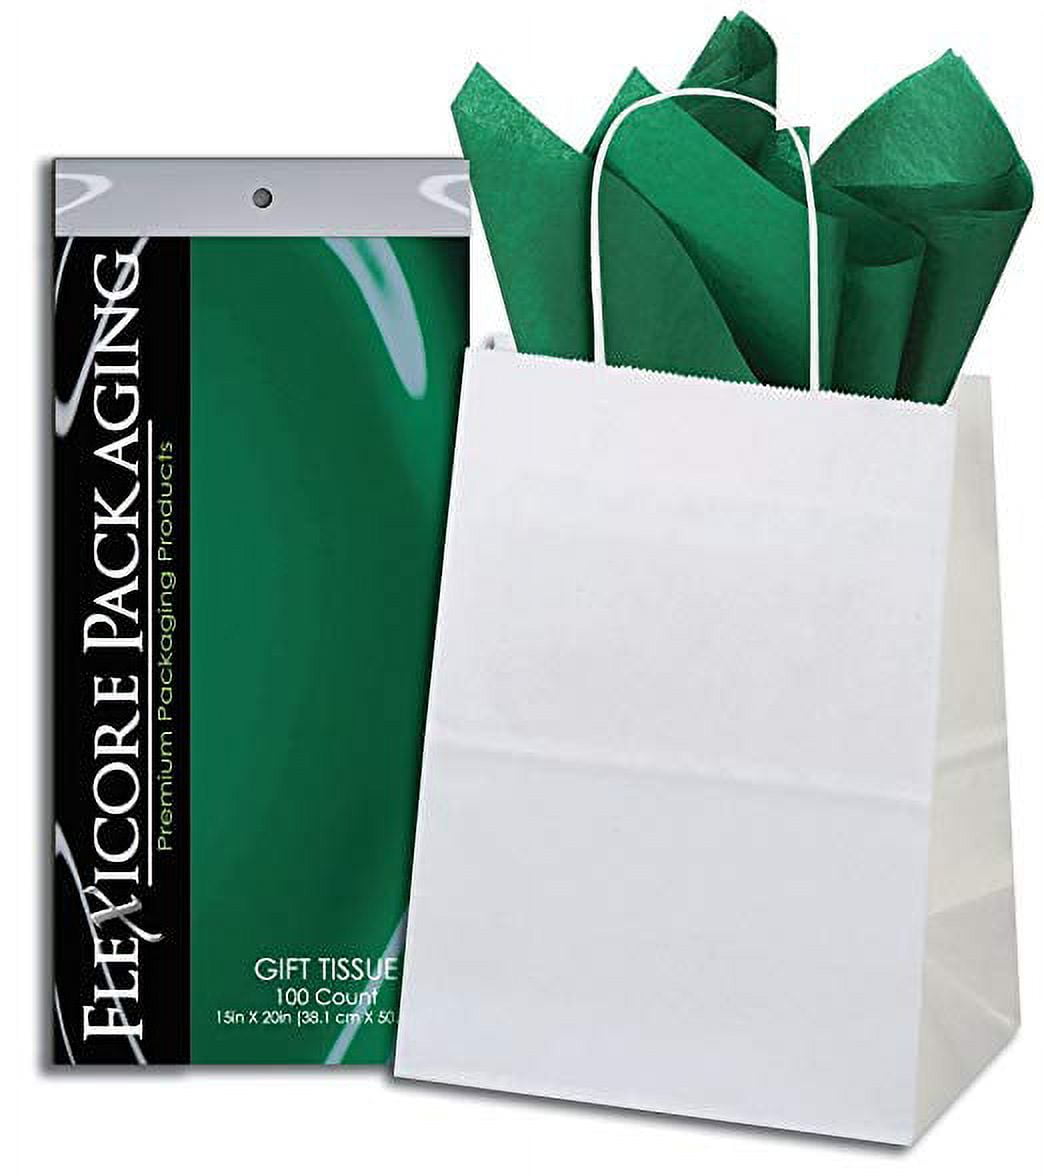 50ct White Paper Gift Bags + 100ct Lime Gift Tissue (Flexicore Packaging), Size: 8 inchx4 inchx10 inch, Green